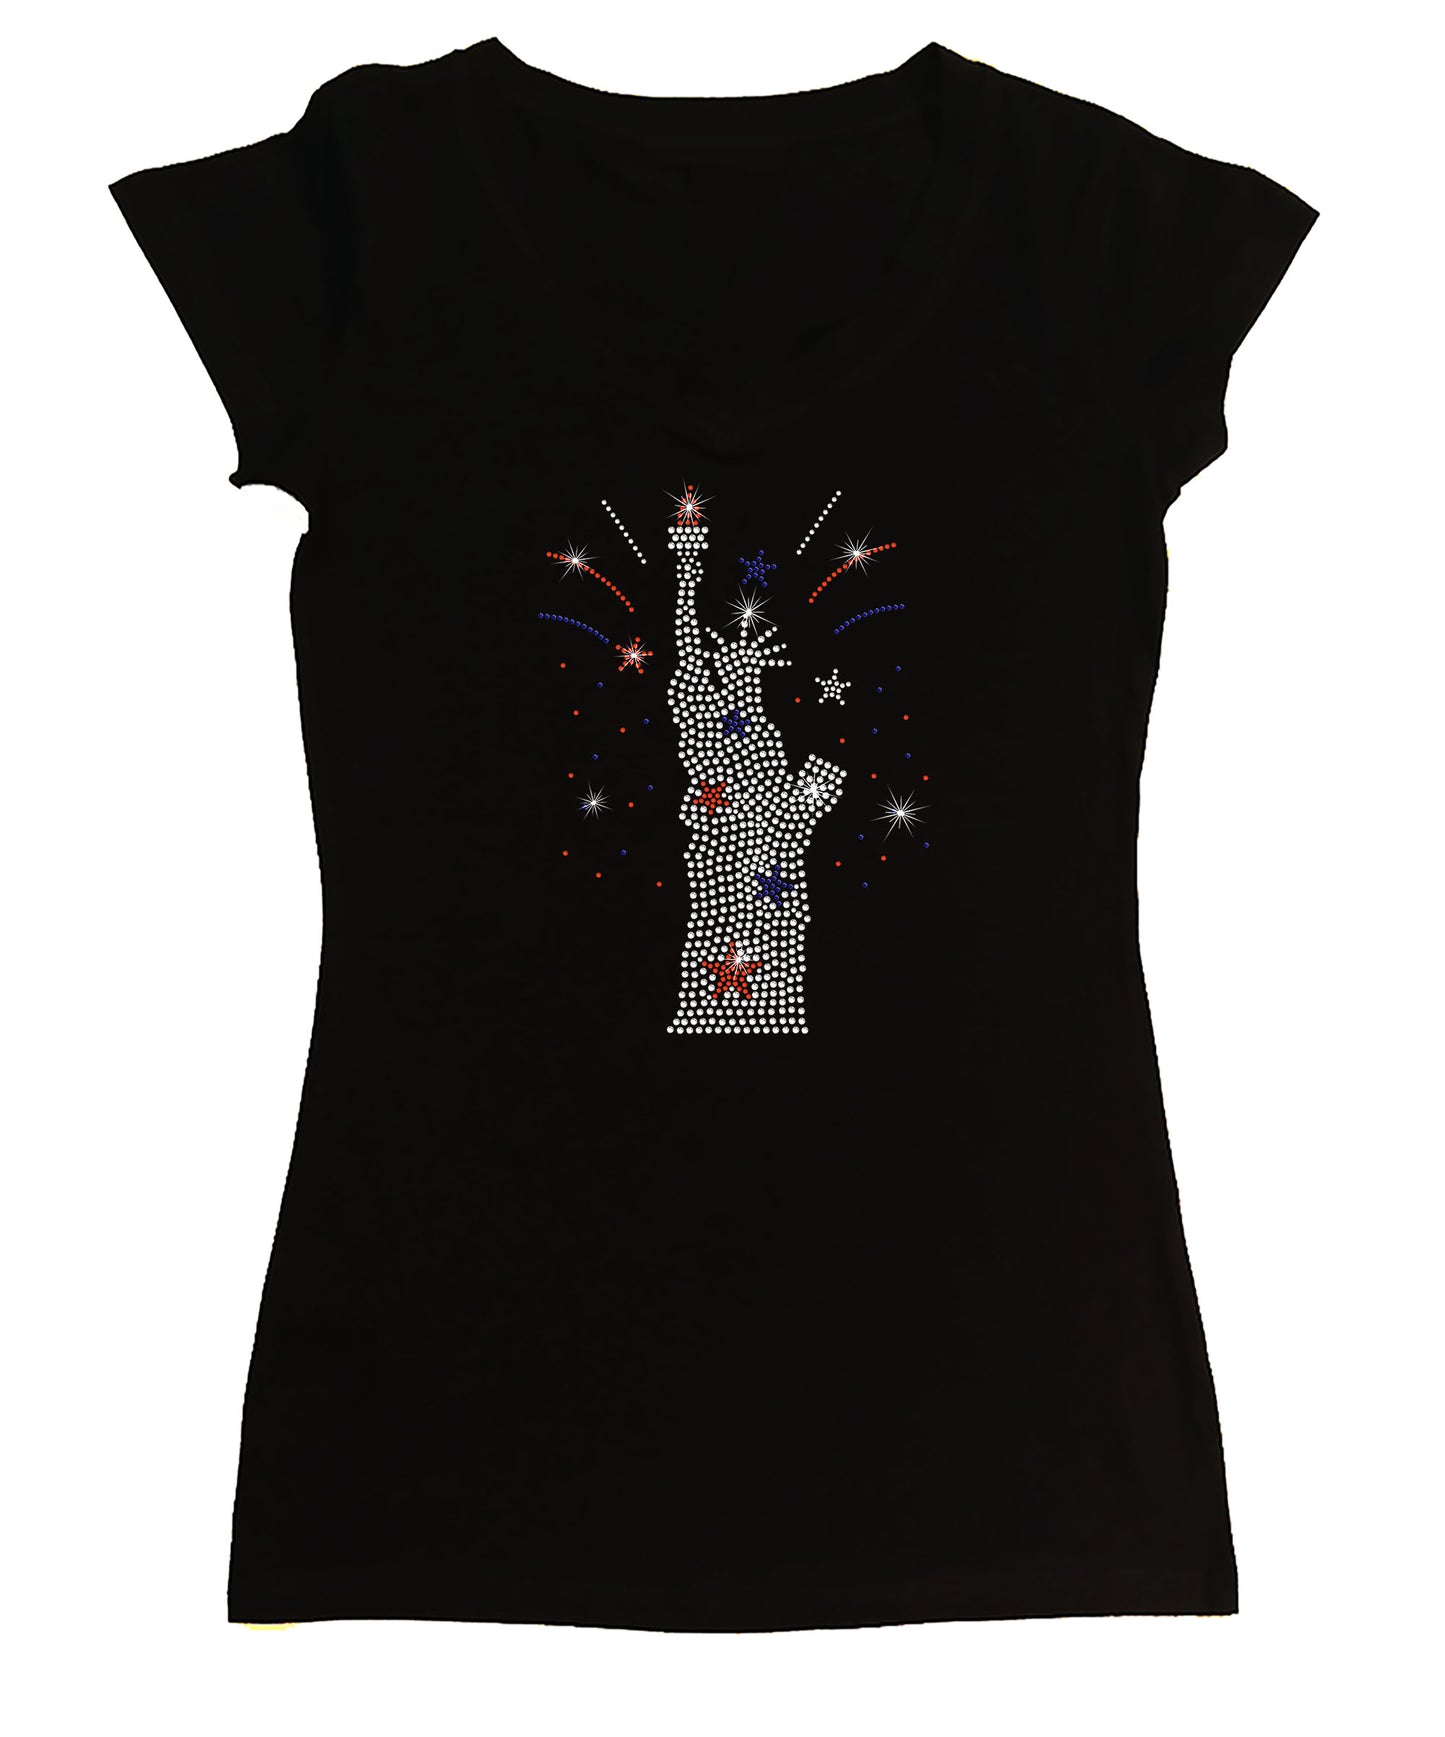 Women's Rhinestone Fitted Tight Snug Shirt Statue of Liberty with Firework Burst in Red, White & Blue, Patriotic Shirt, 4th of July Shirt